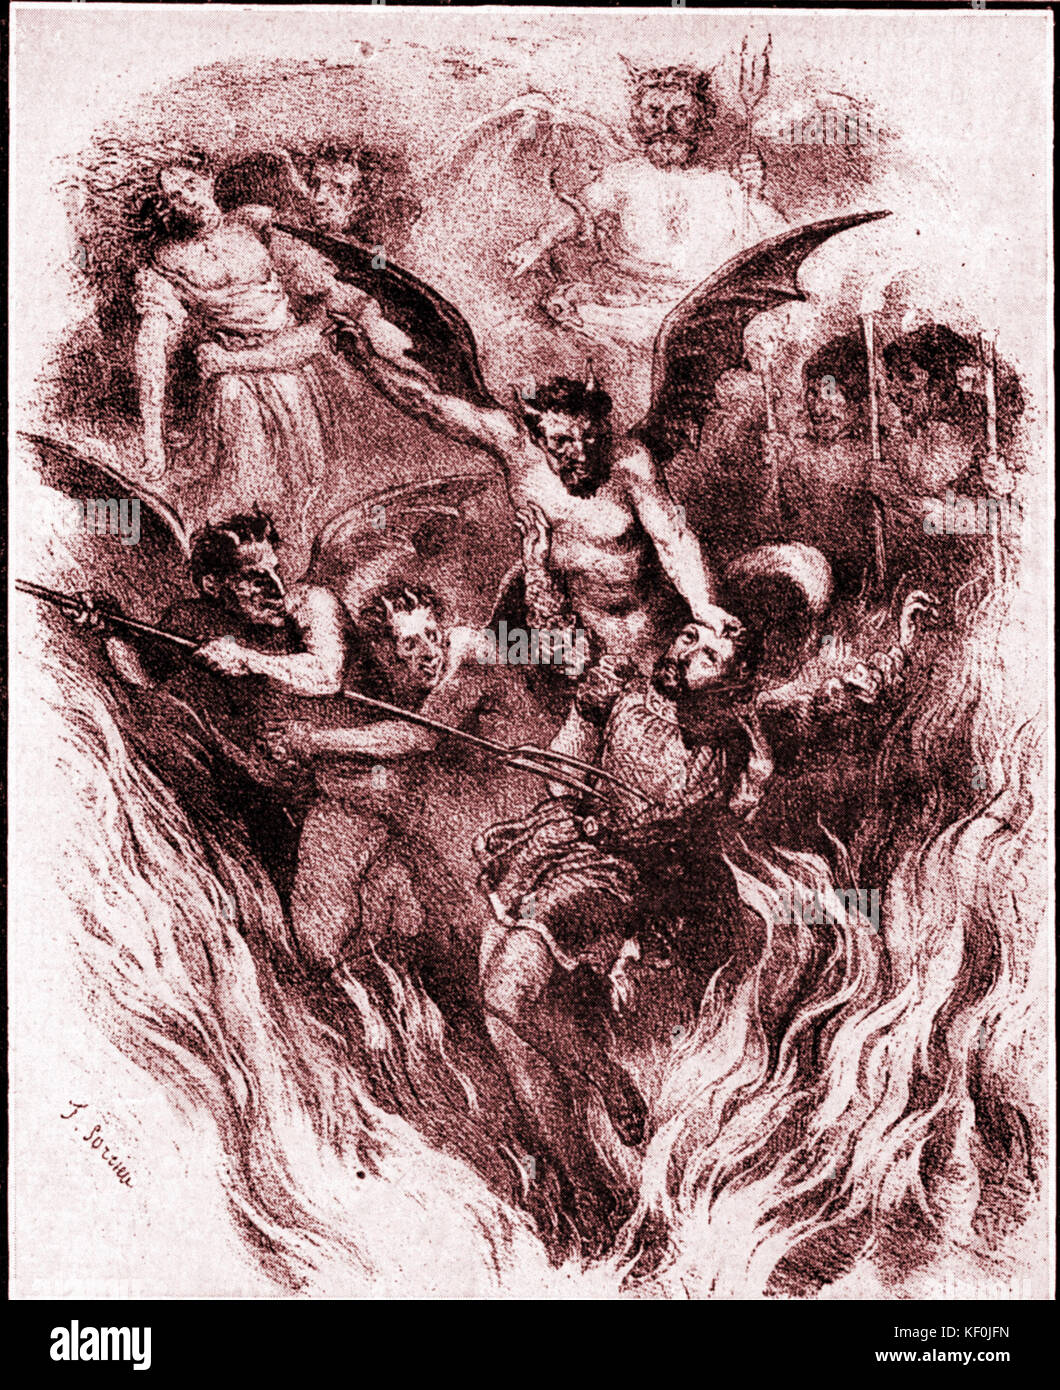 Hector Berlioz's 'The Damnation Faust', orchestra score cover by Frederic Sorrieu (1854). Compositore francese, 1803-1869. Foto Stock